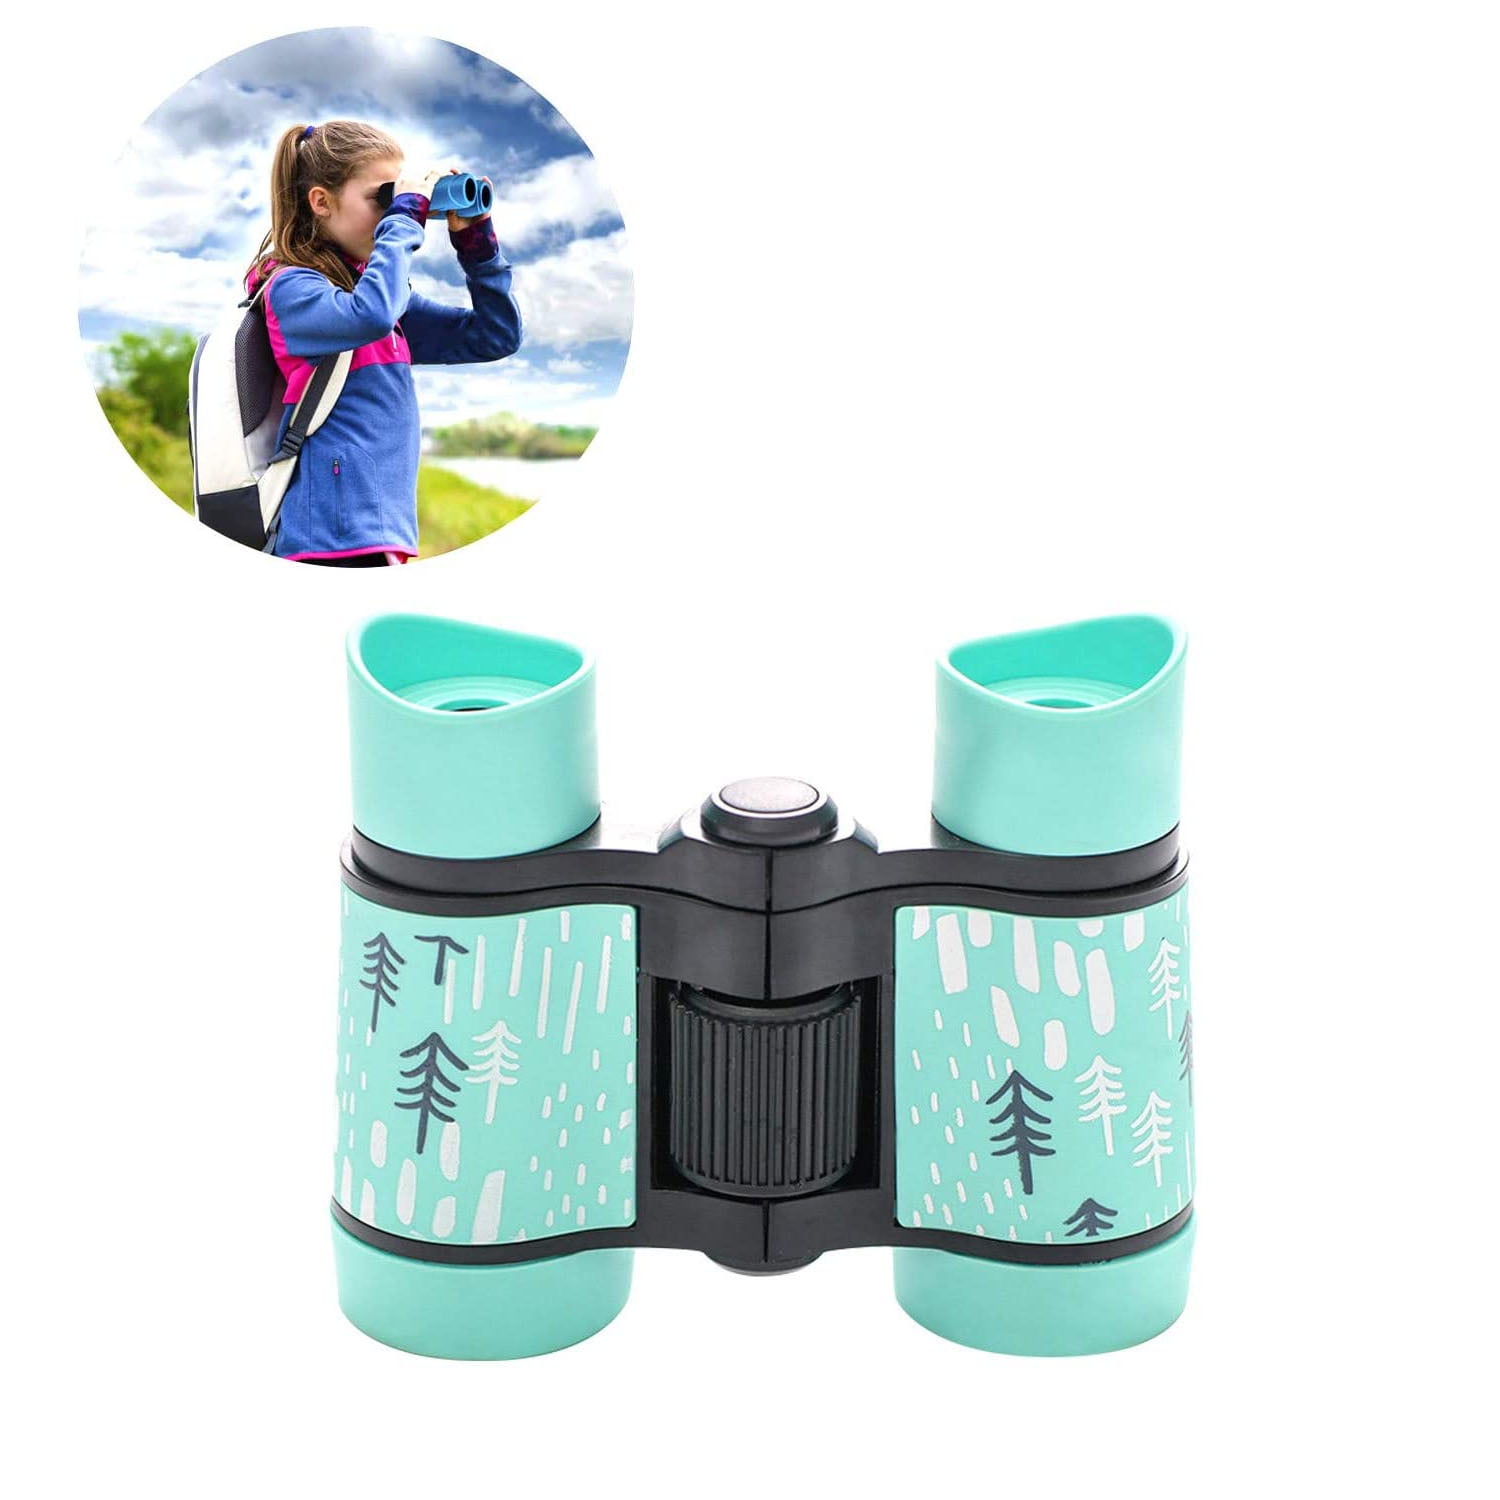 Best Gifts for Teen Girl Happy Gift Compact Watreproof & Shock Proof Binocular Binocular for Kids Toys for 3-12 Year Old Girls to Watching Wildlife or Outdoor Play Red 